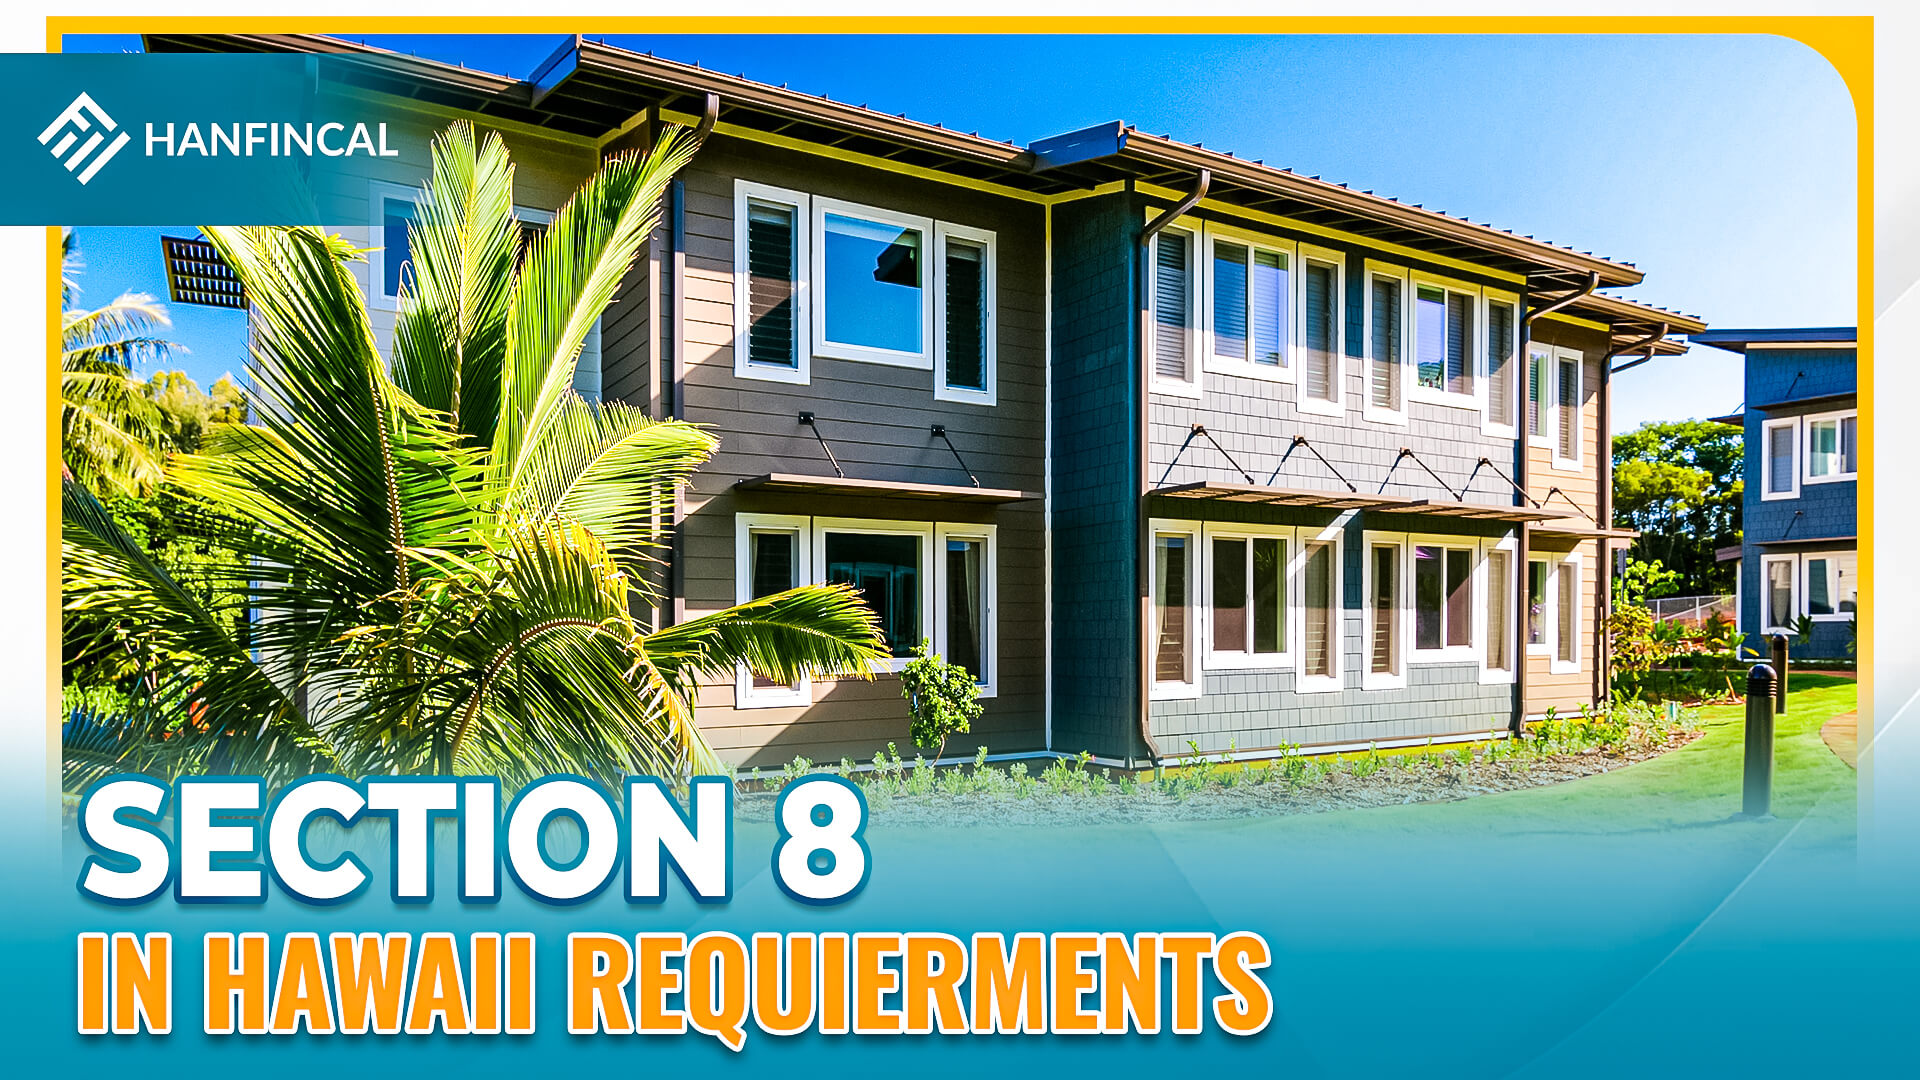 How To Apply For Section 8 In Hawaii